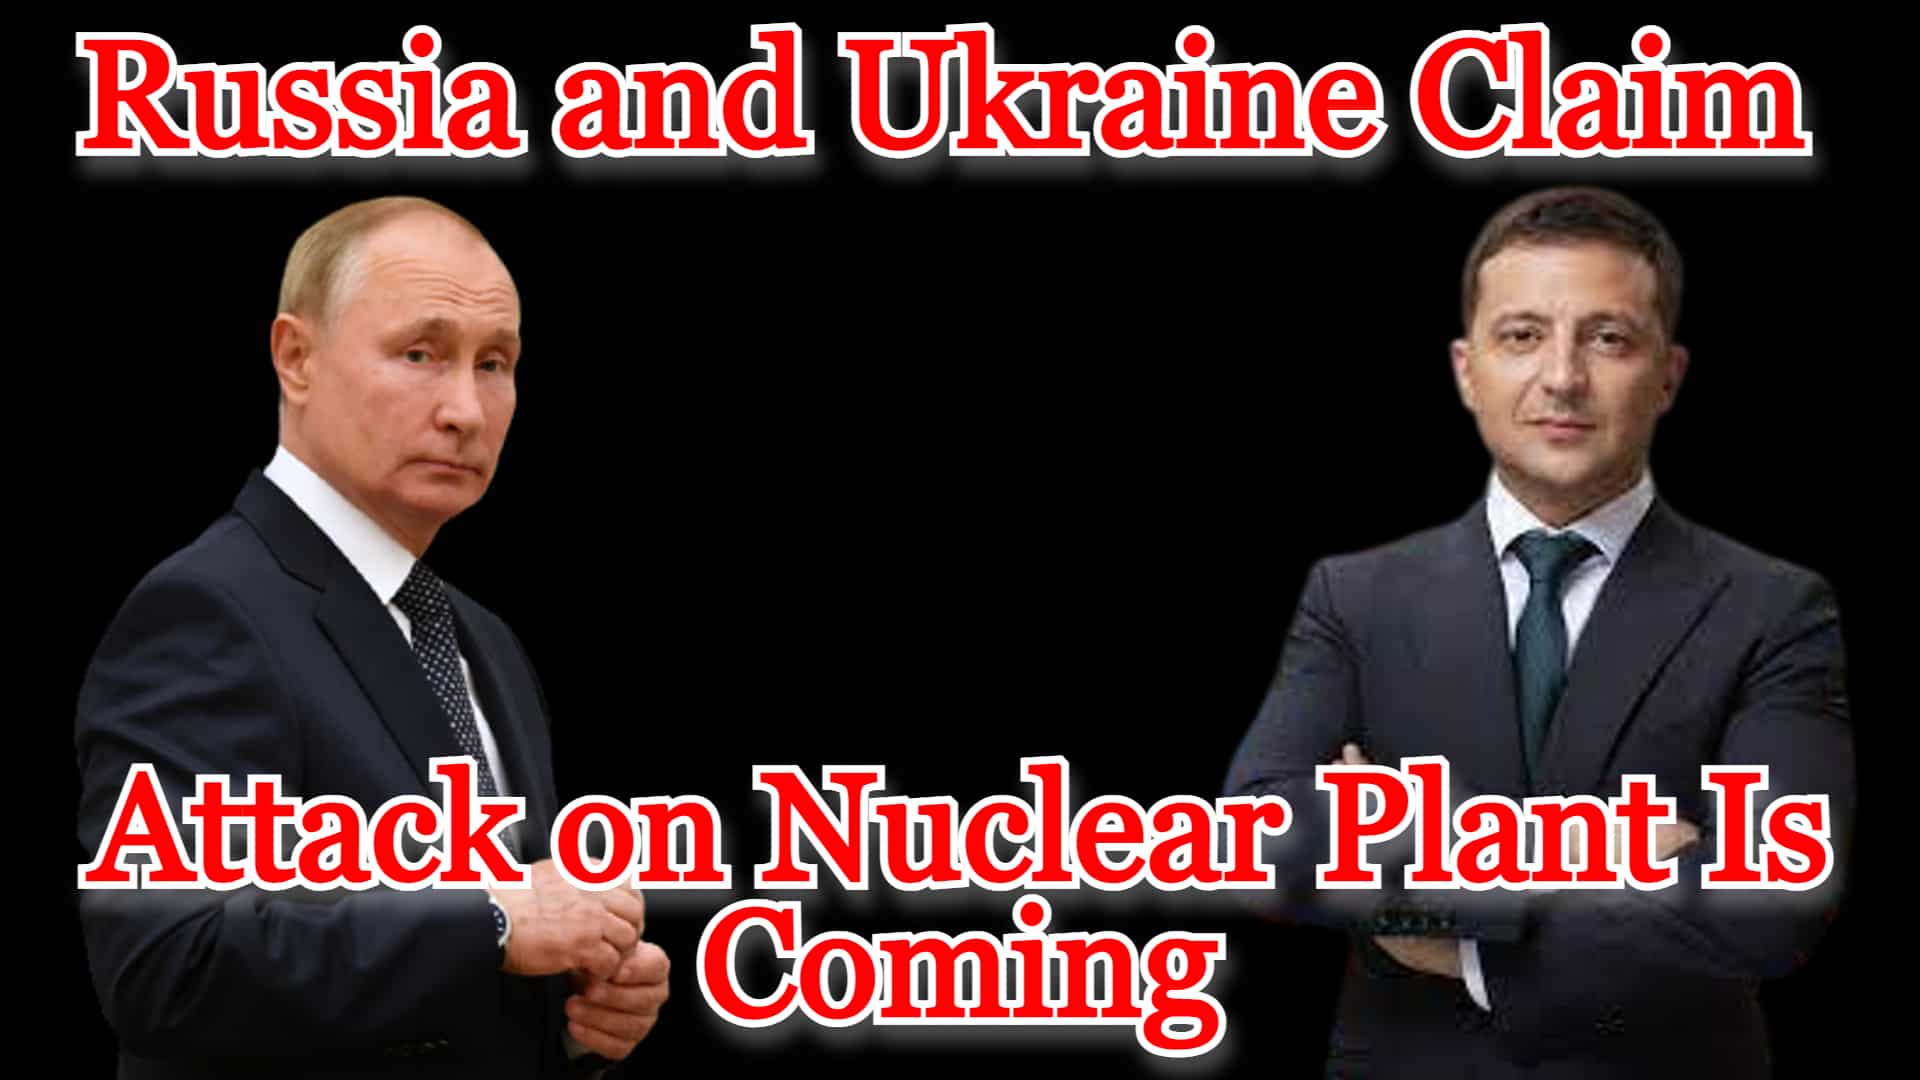 COI #442: Russia and Ukraine Claim Attack on Nuclear Plant Is Coming